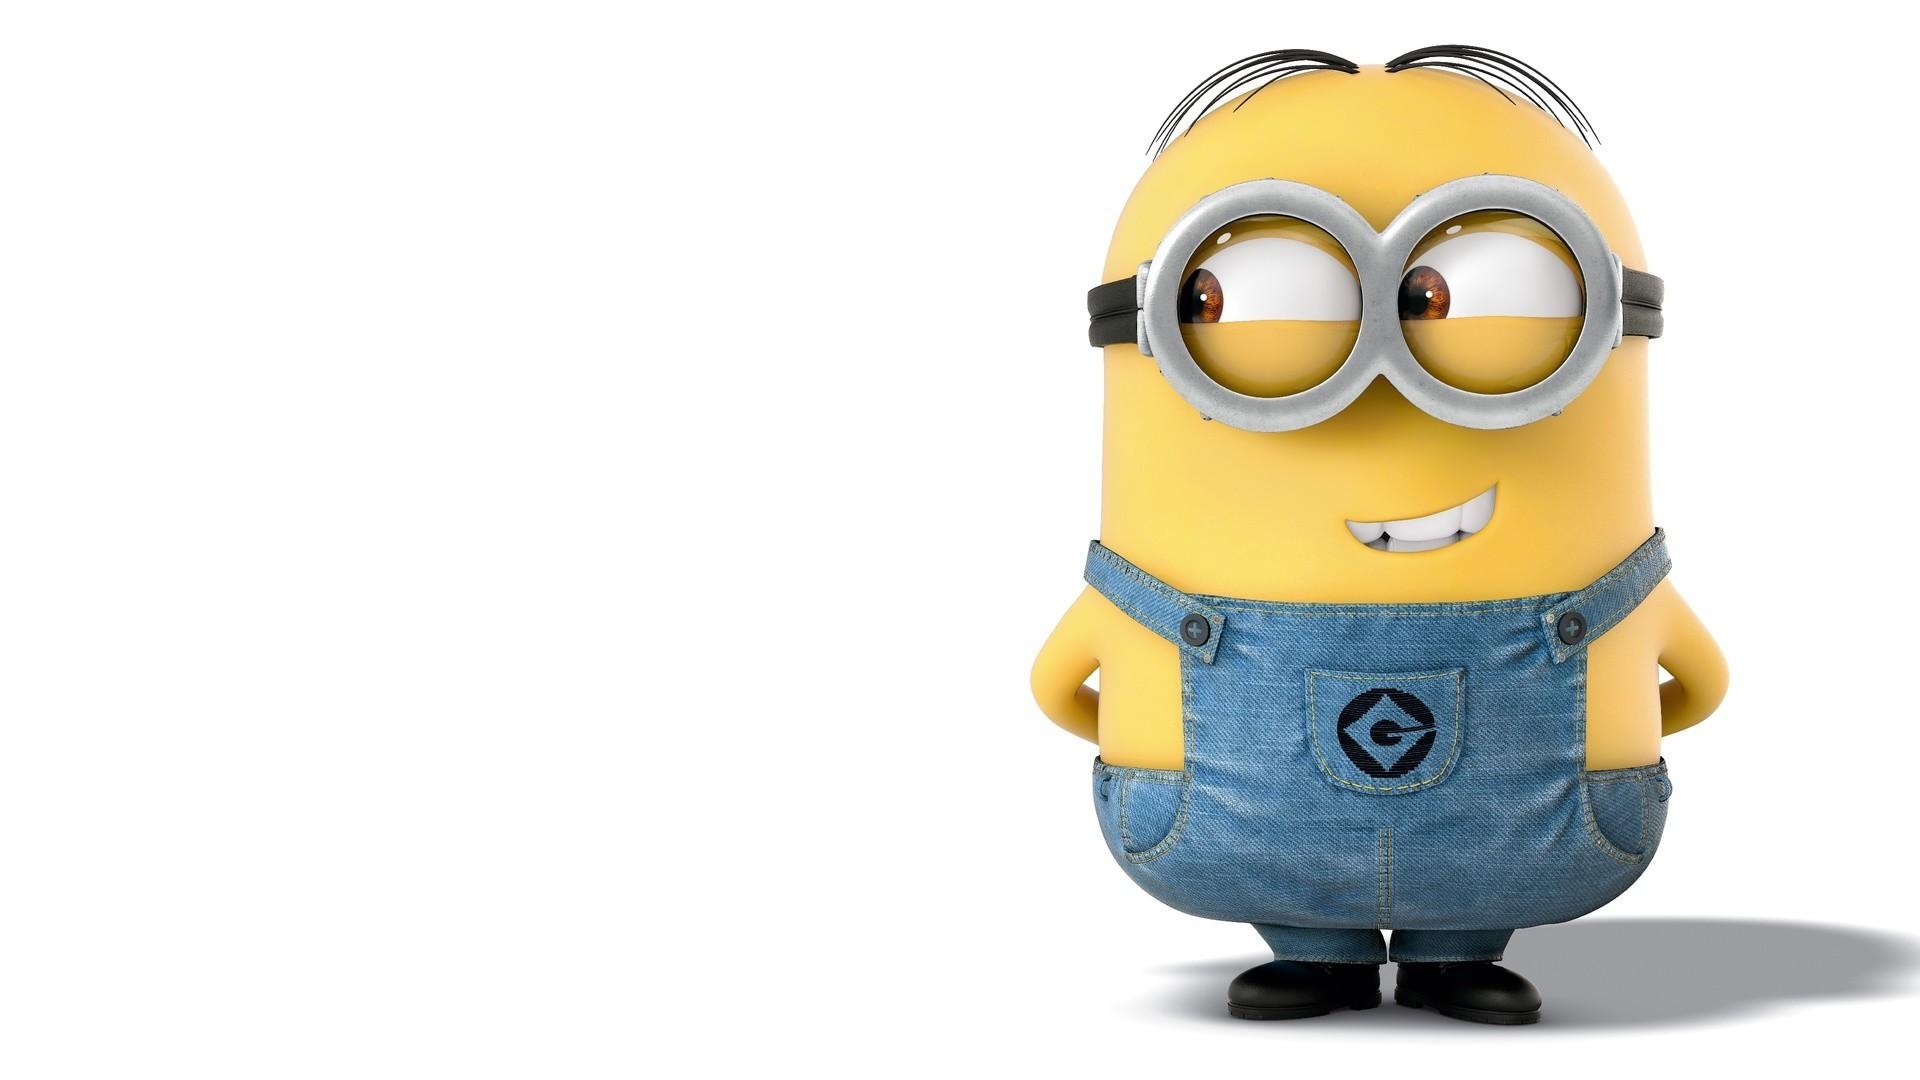 Minions Stuart Kevin Bob HD Wallpaper Background Fine Art Paper Print  Poster Fine Art Print  Art  Paintings posters in India  Buy art film  design movie music nature and educational